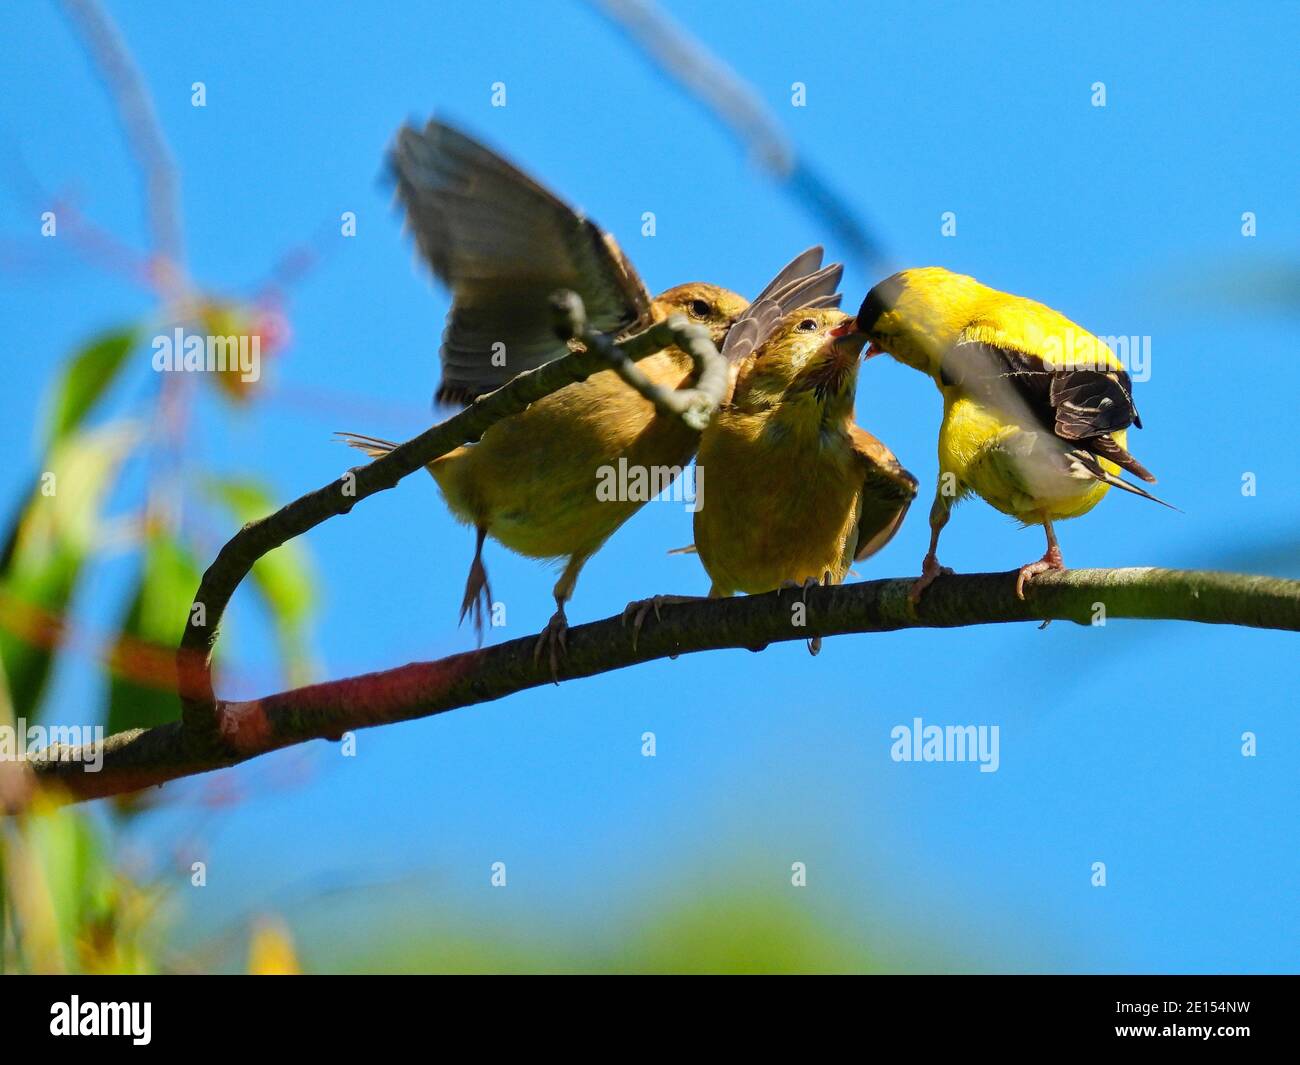 Goldfinch Bird Feeds Babies: A father American goldfinch bird attempts to feed two hungry finch babies who fight over the food while perched Stock Photo